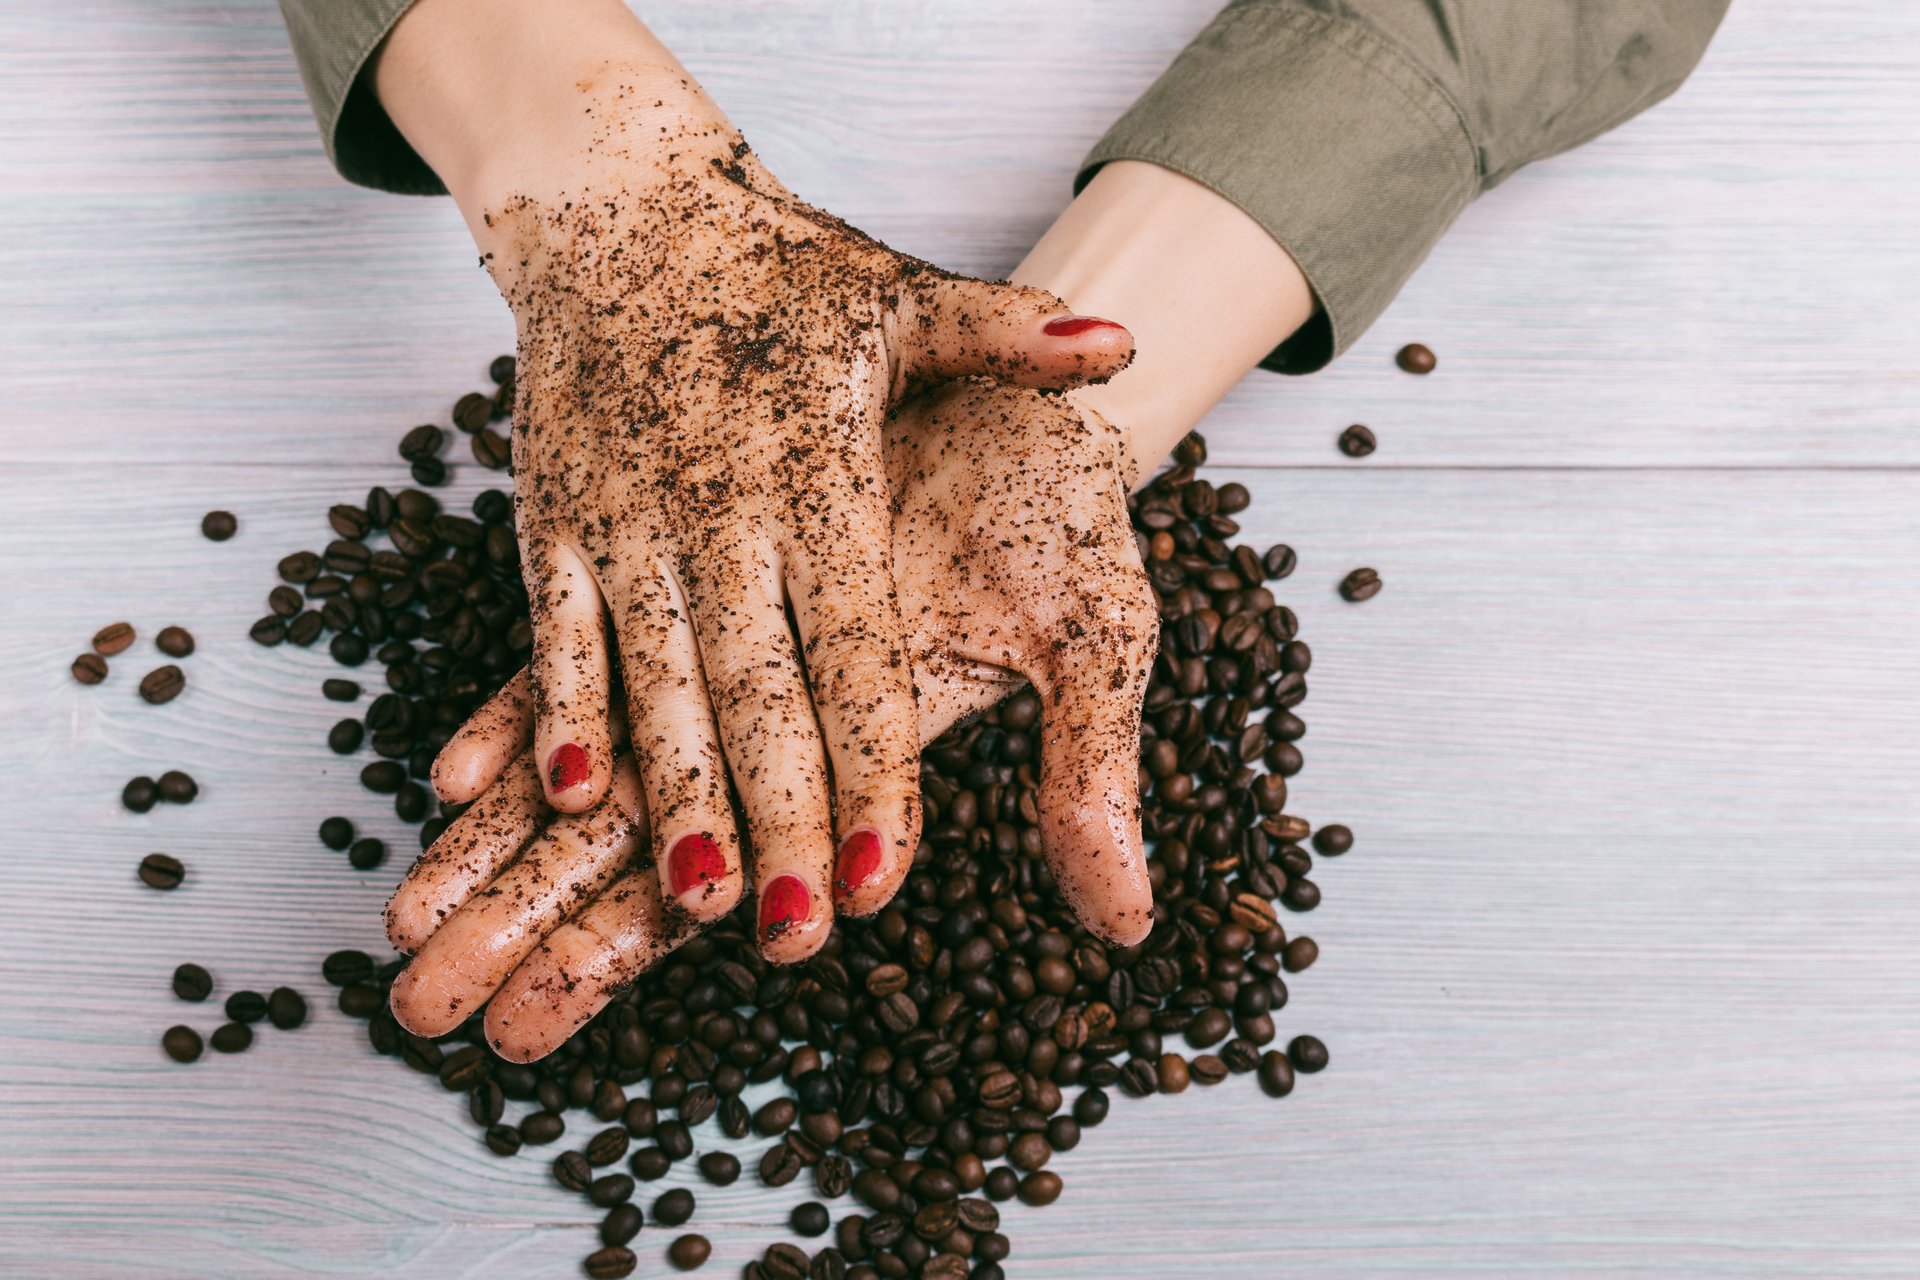 A woman scrubs her hands clean with coffee grounds